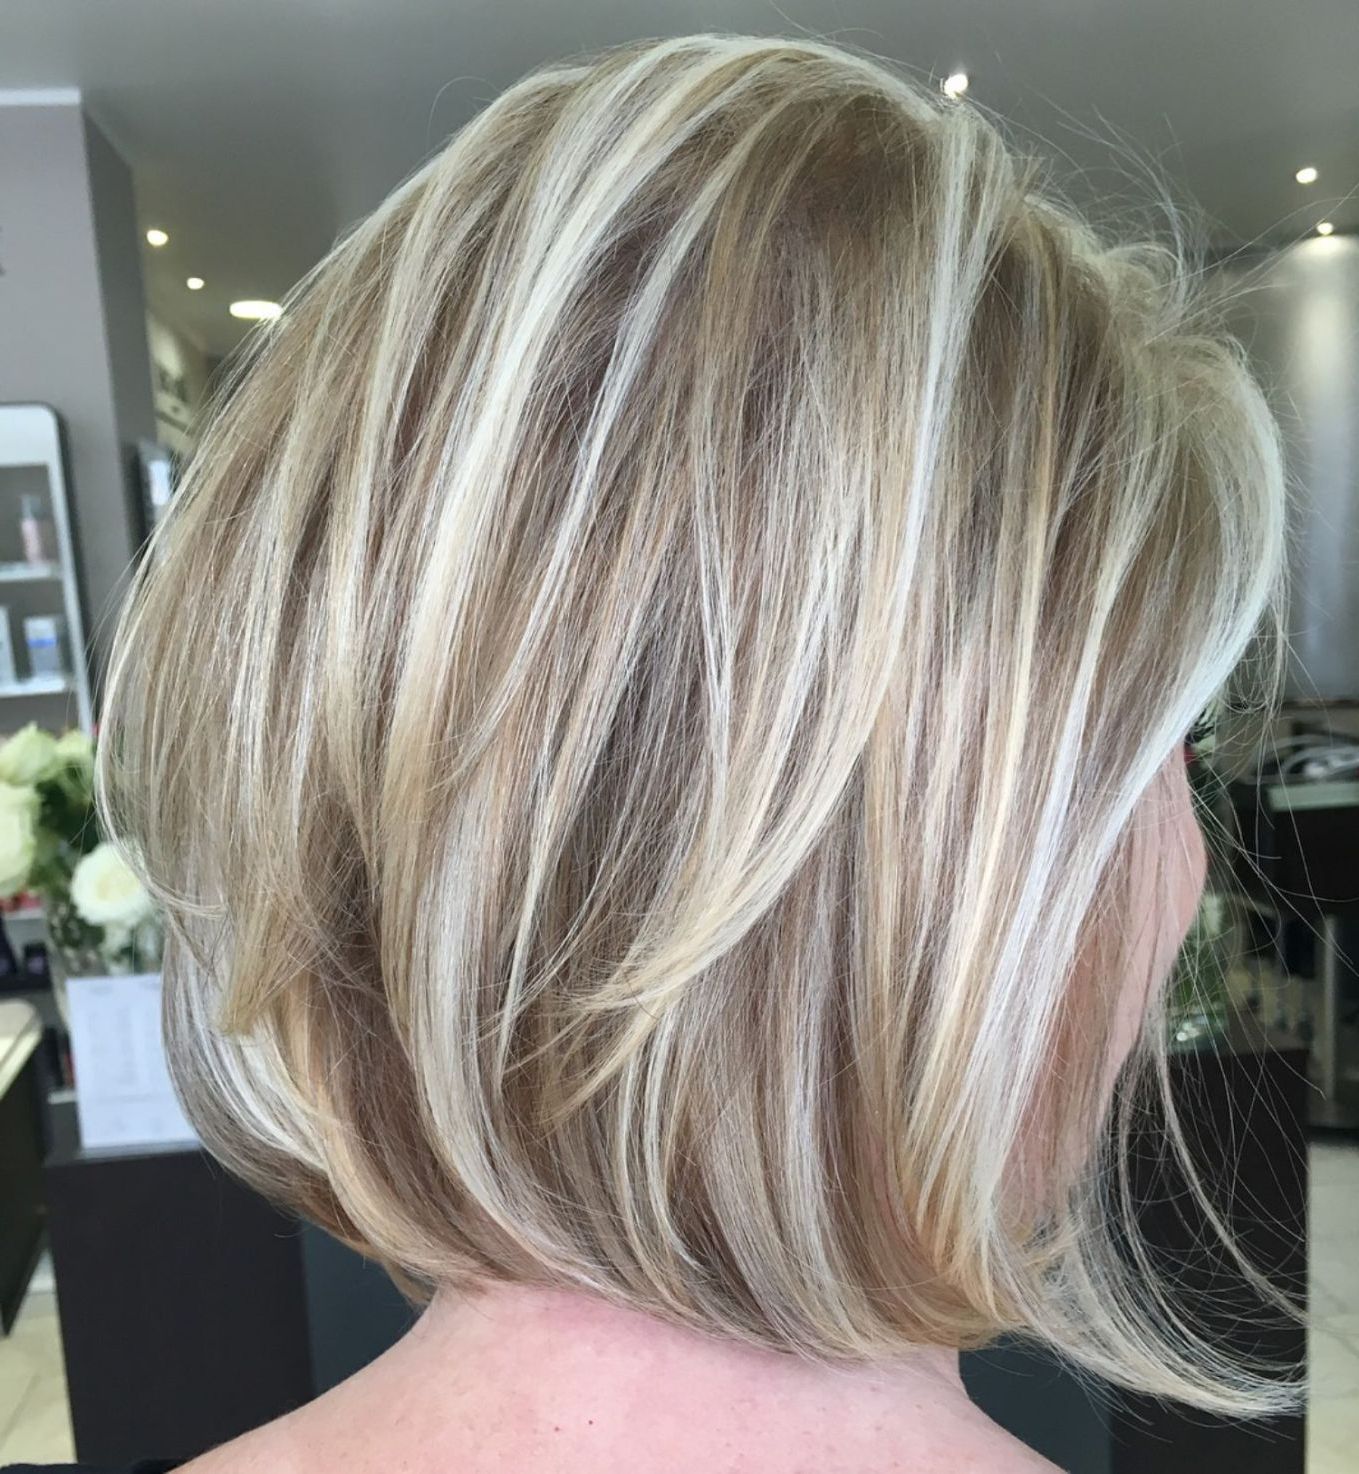 60 Layered Bob Styles: Modern Haircuts With Layers For Any Occasion With Regard To Layered Balayage Bob Hairstyles (Gallery 19 of 20)